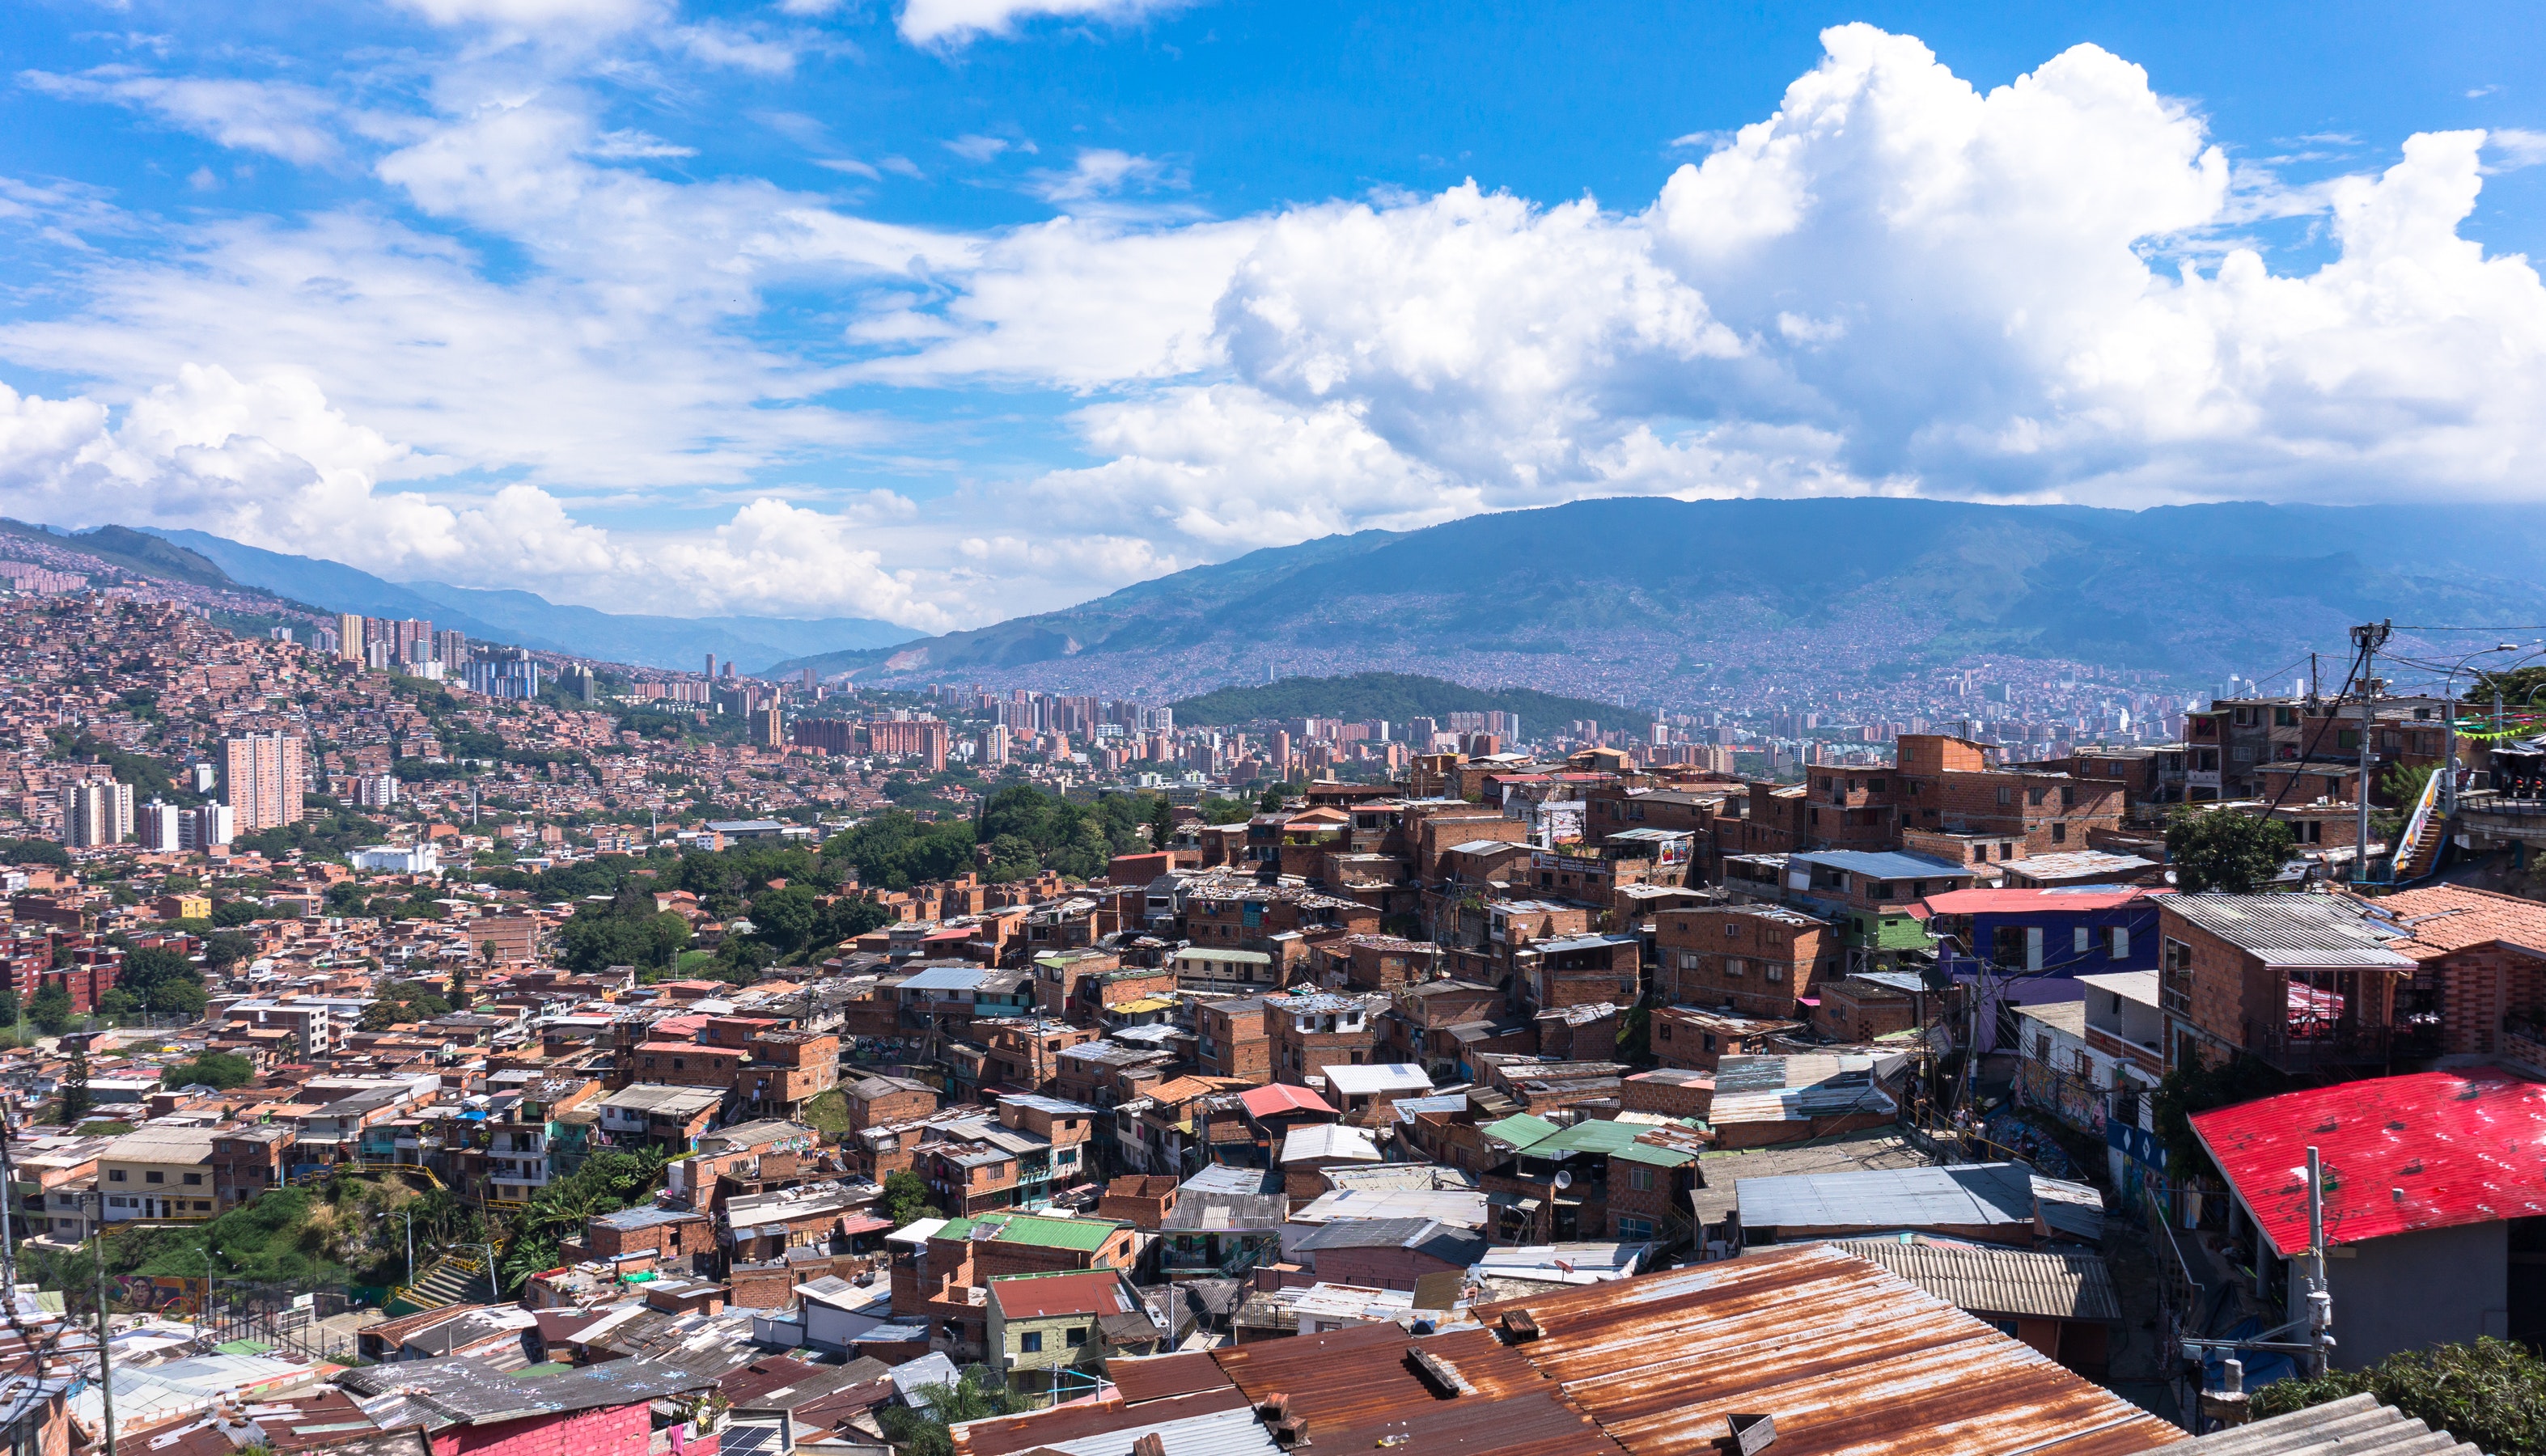 Image of the city of Medellin - the skyline Cover Image